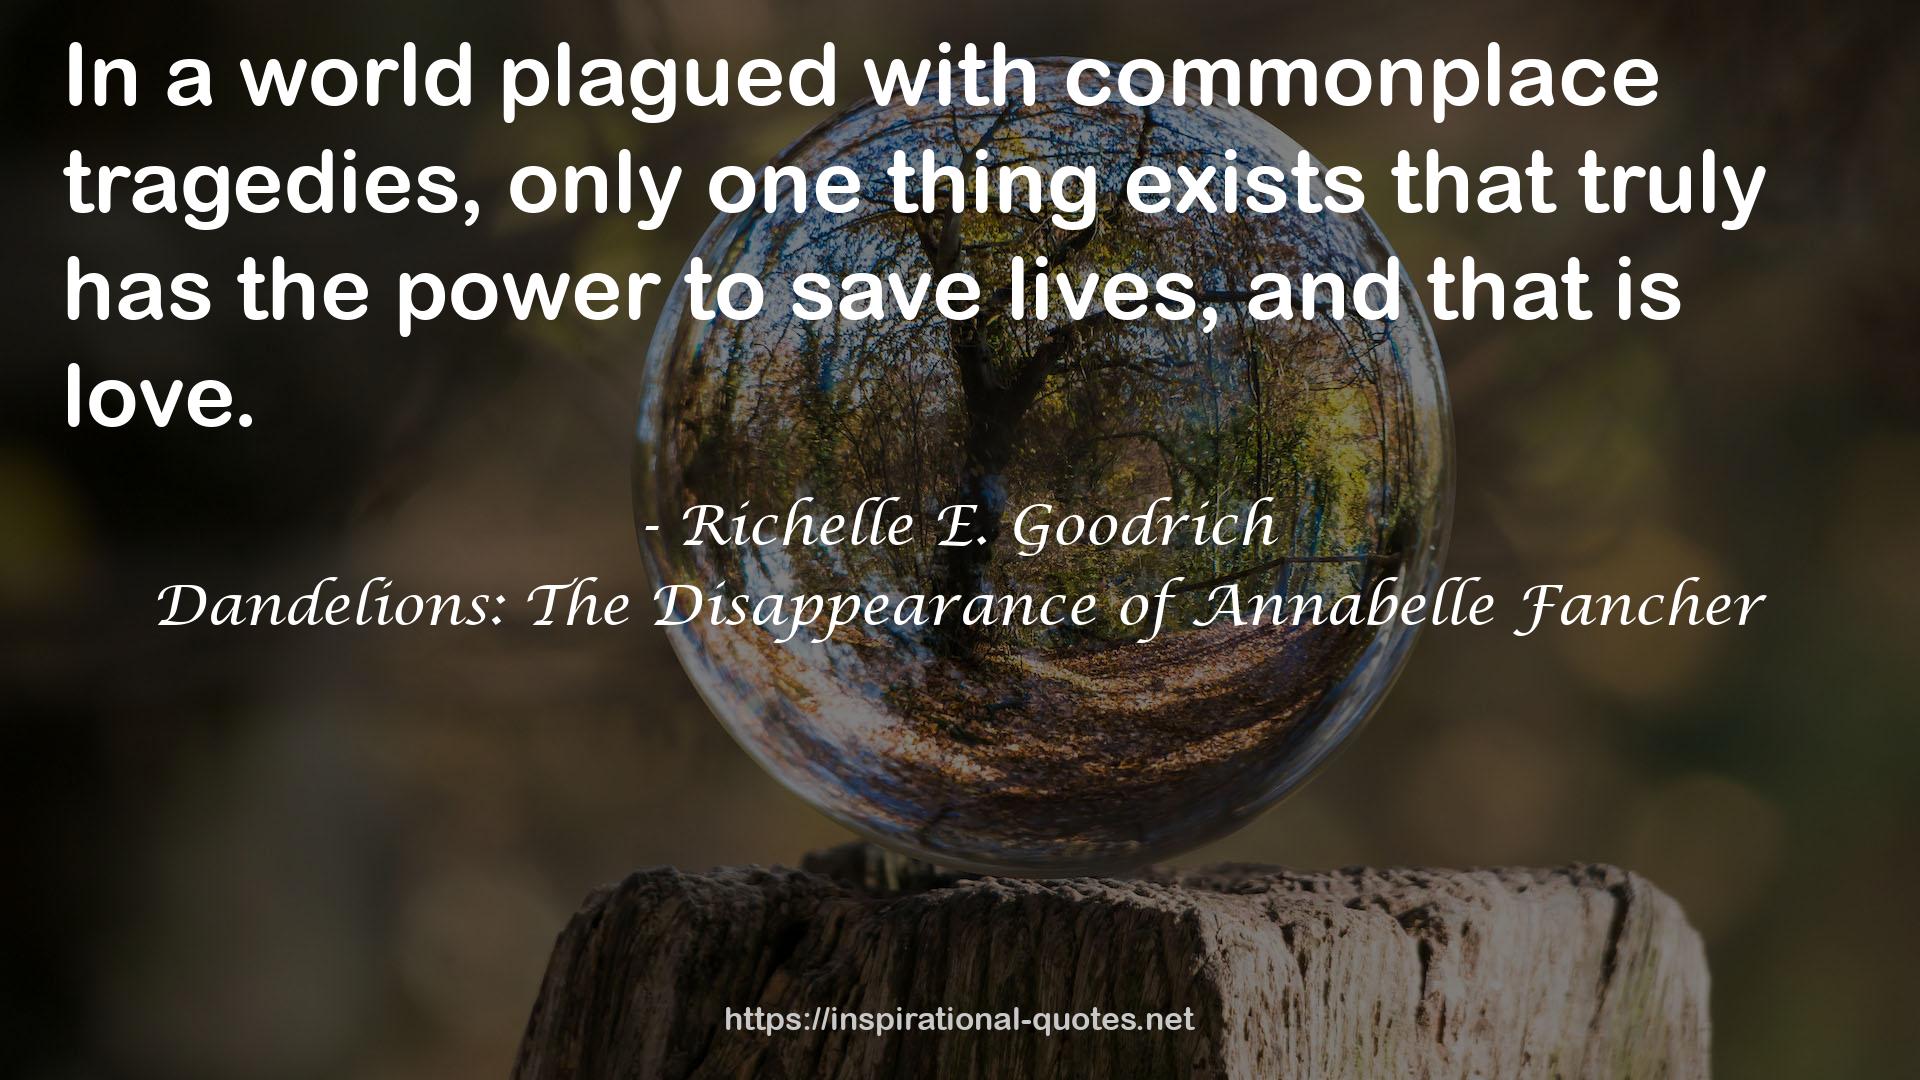 Dandelions: The Disappearance of Annabelle Fancher QUOTES